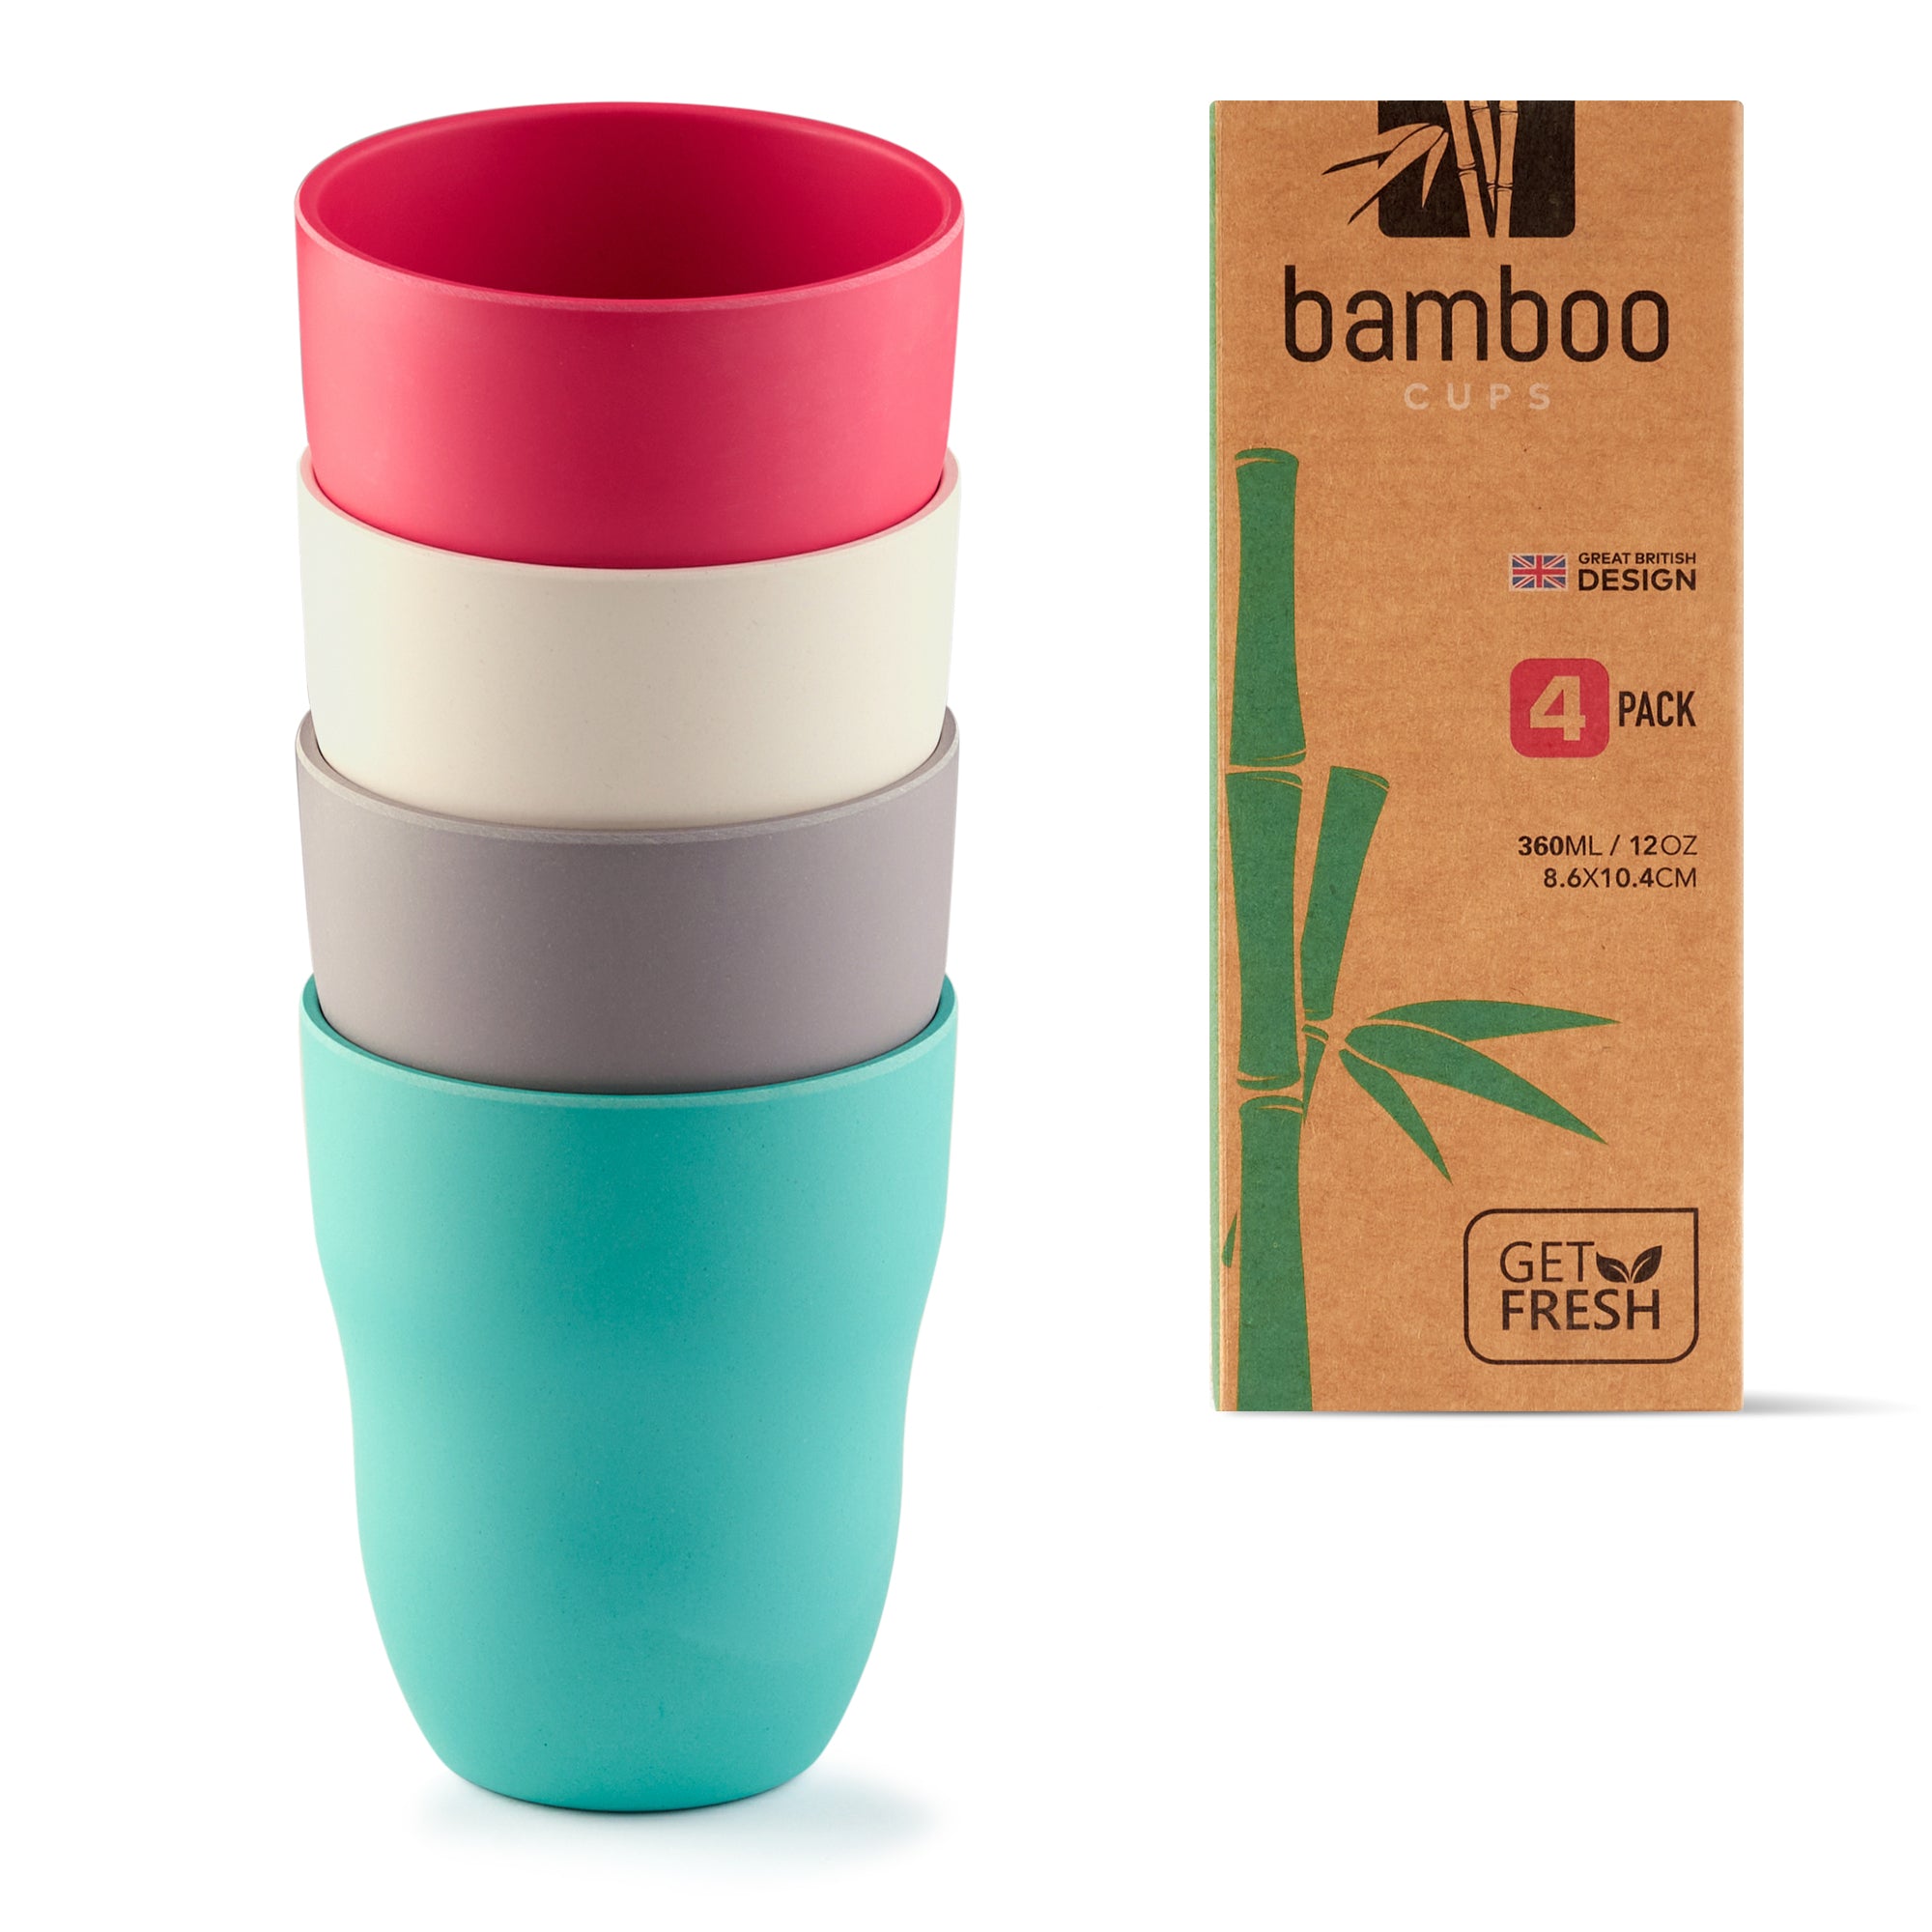 Adult-sized bamboo cups